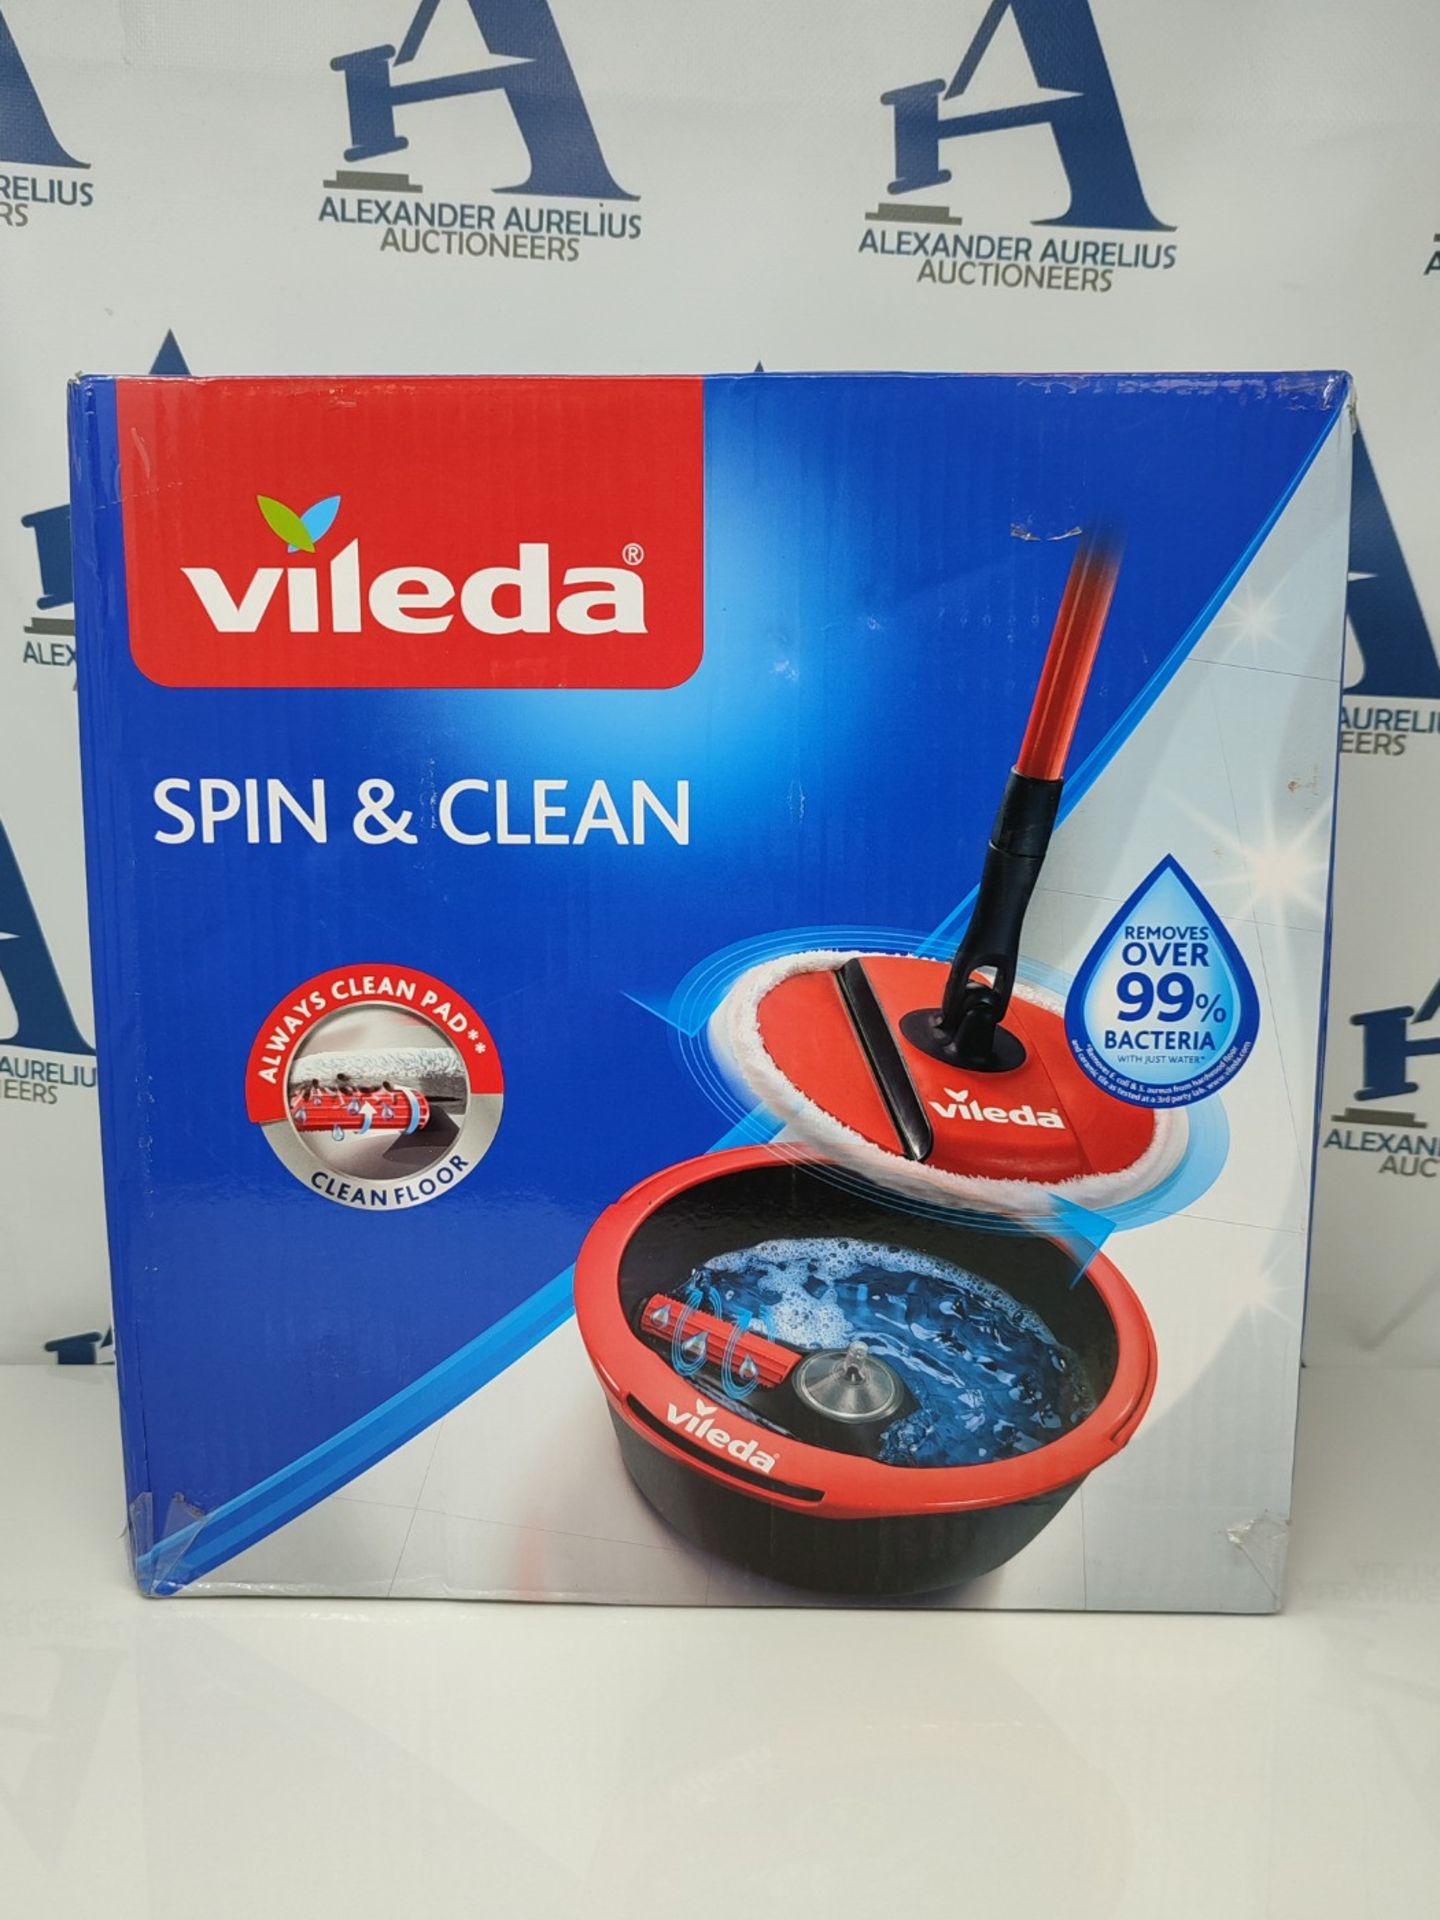 Vileda Spin and Clean Floor Mop and Bucket Set, Spin Mop for Cleaning Floors, Set of 1 - Bild 2 aus 3